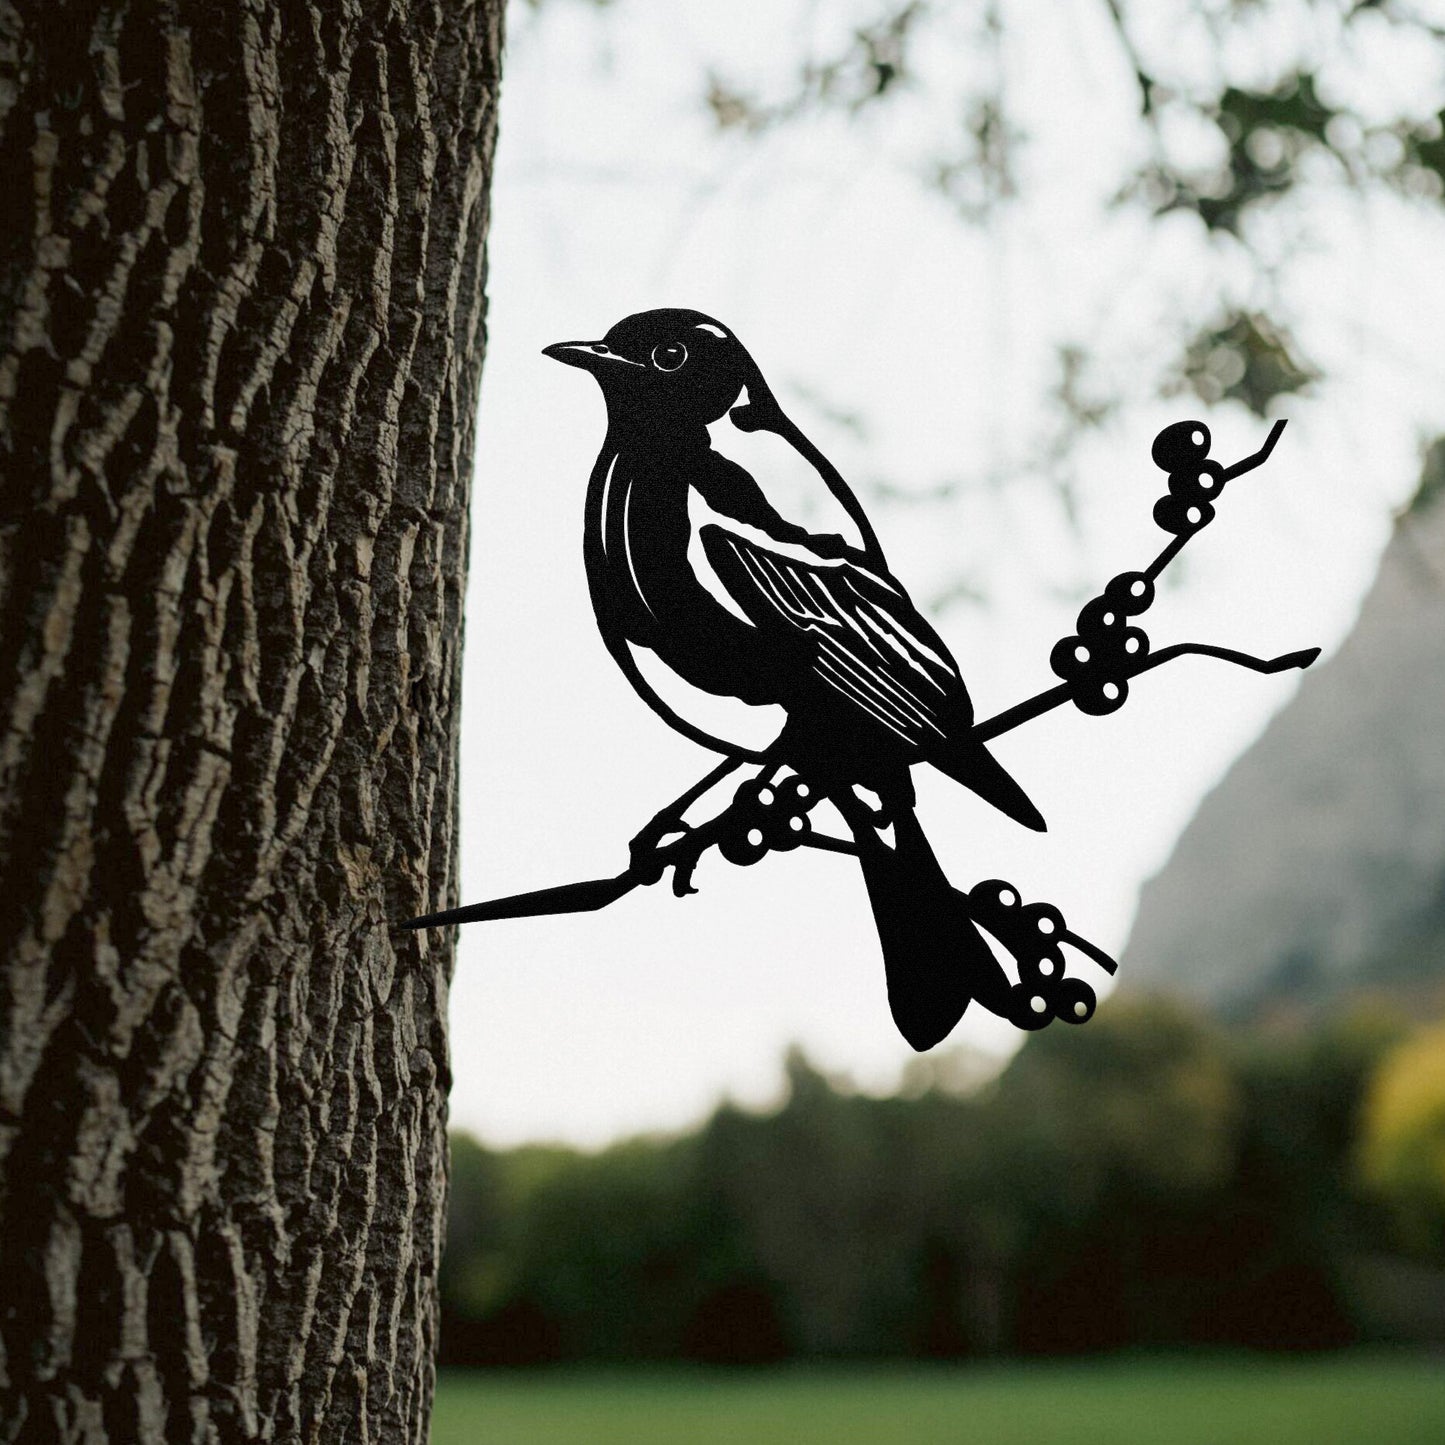 Garden Decoration With Bird Metal - Personalized Metal Sign